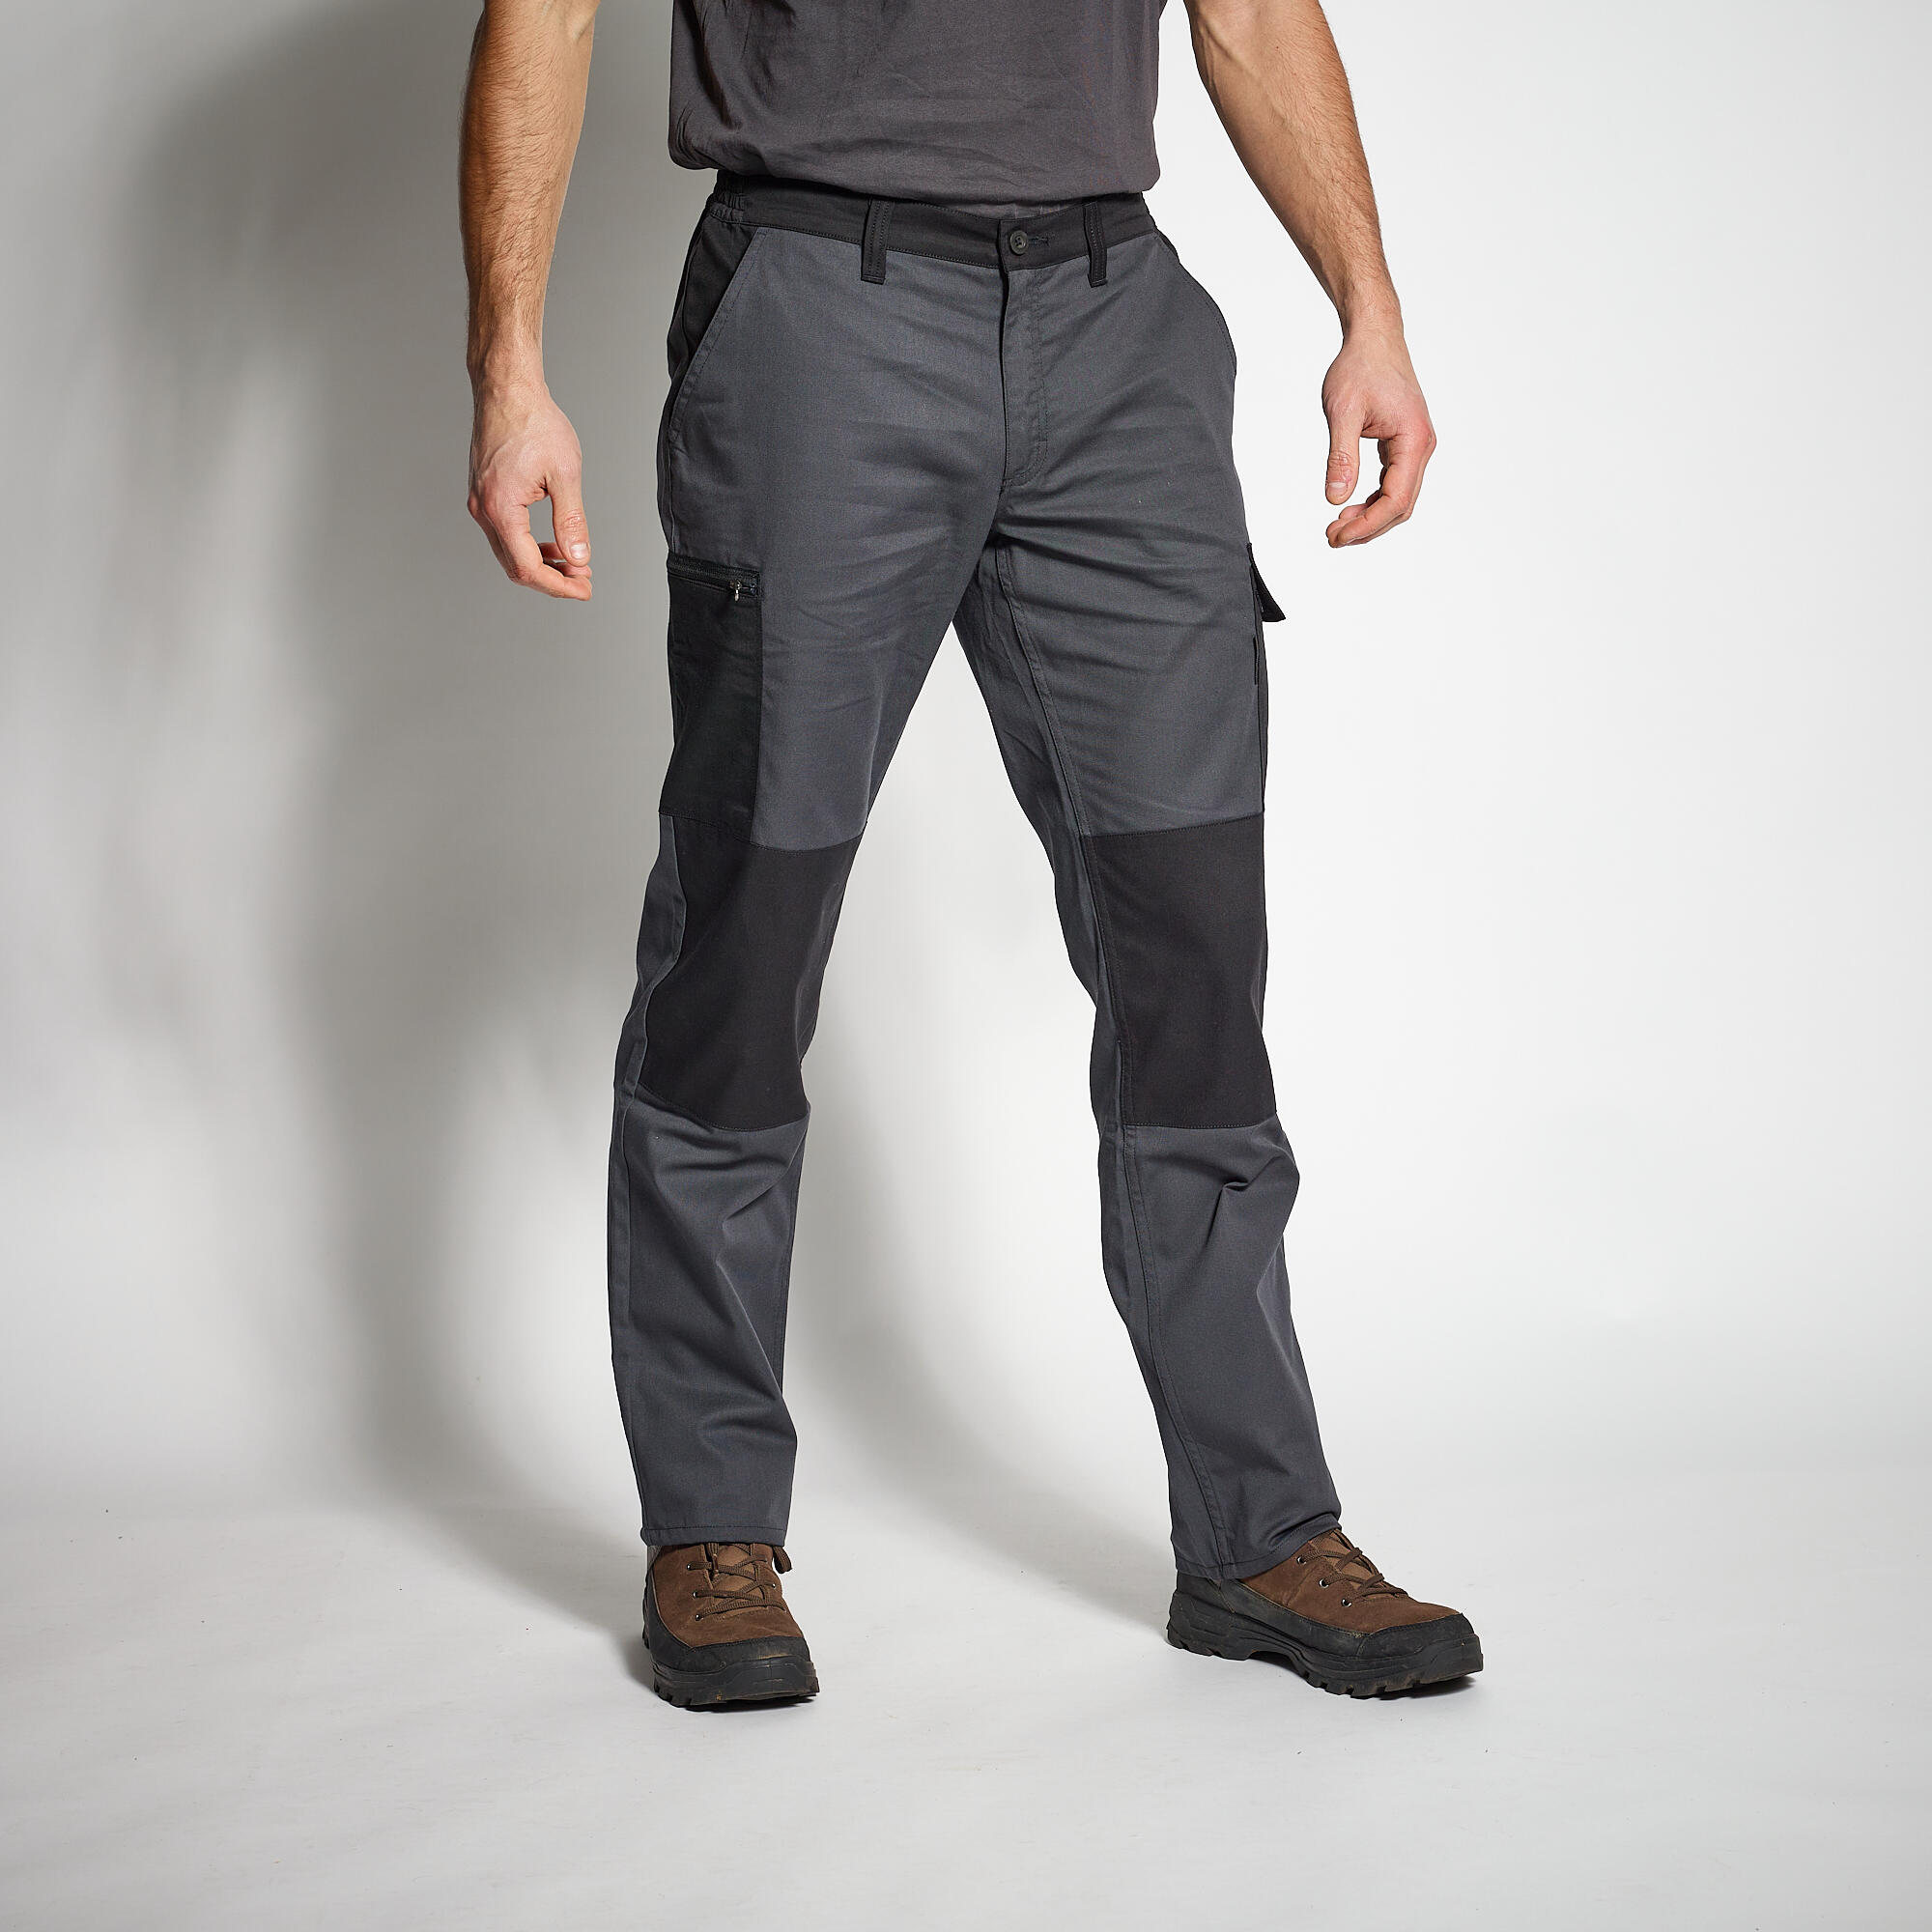 No Pocket  Elasticated Food Trade Trousers  Alsico Workwear